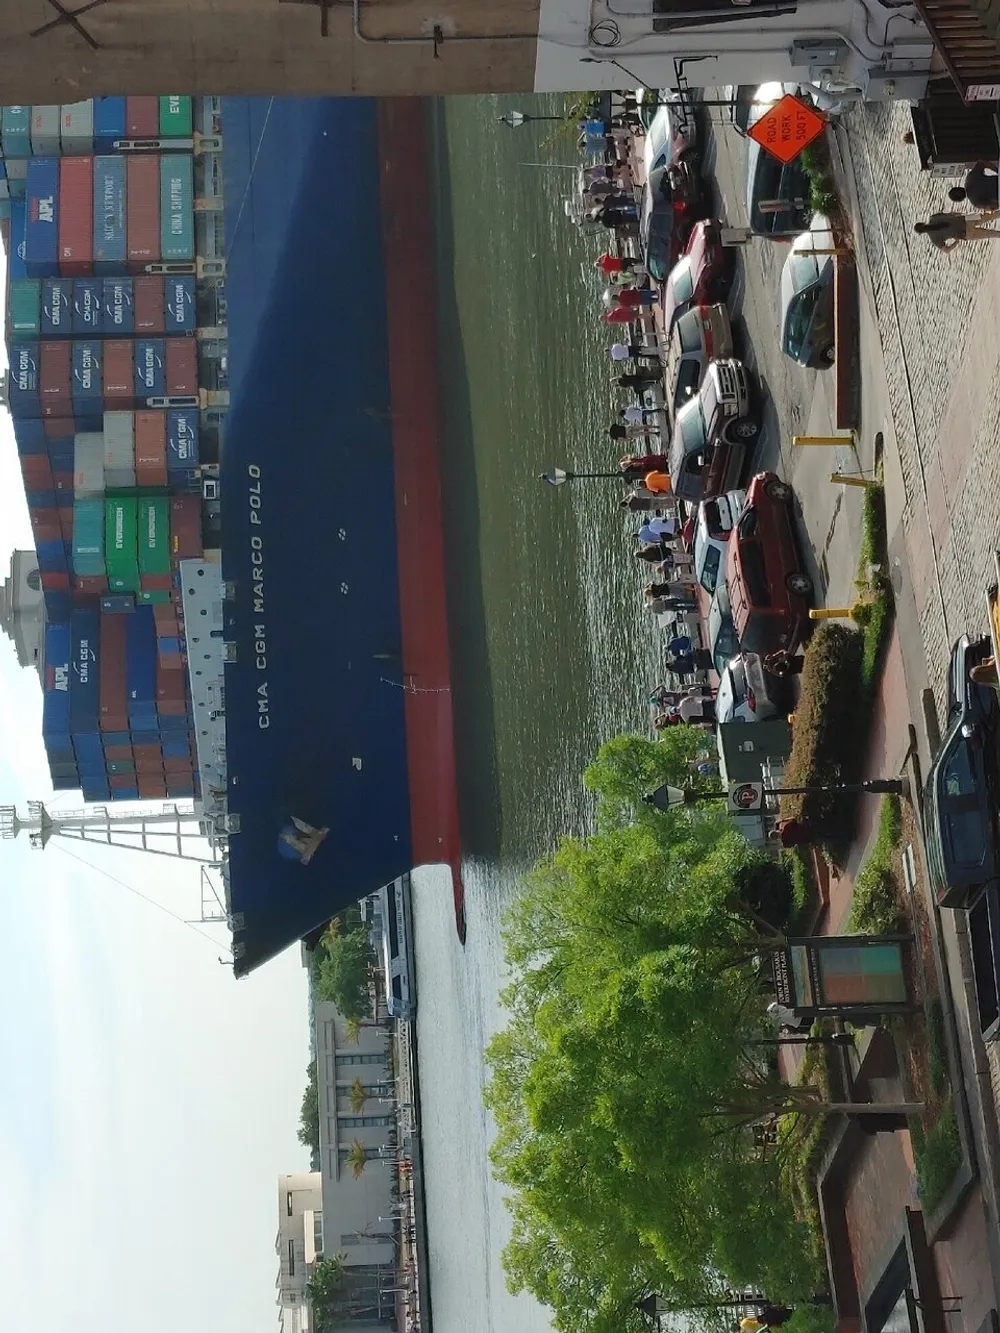 A massive container ship towers over a quayside promenade bustling with people and lined with parked cars